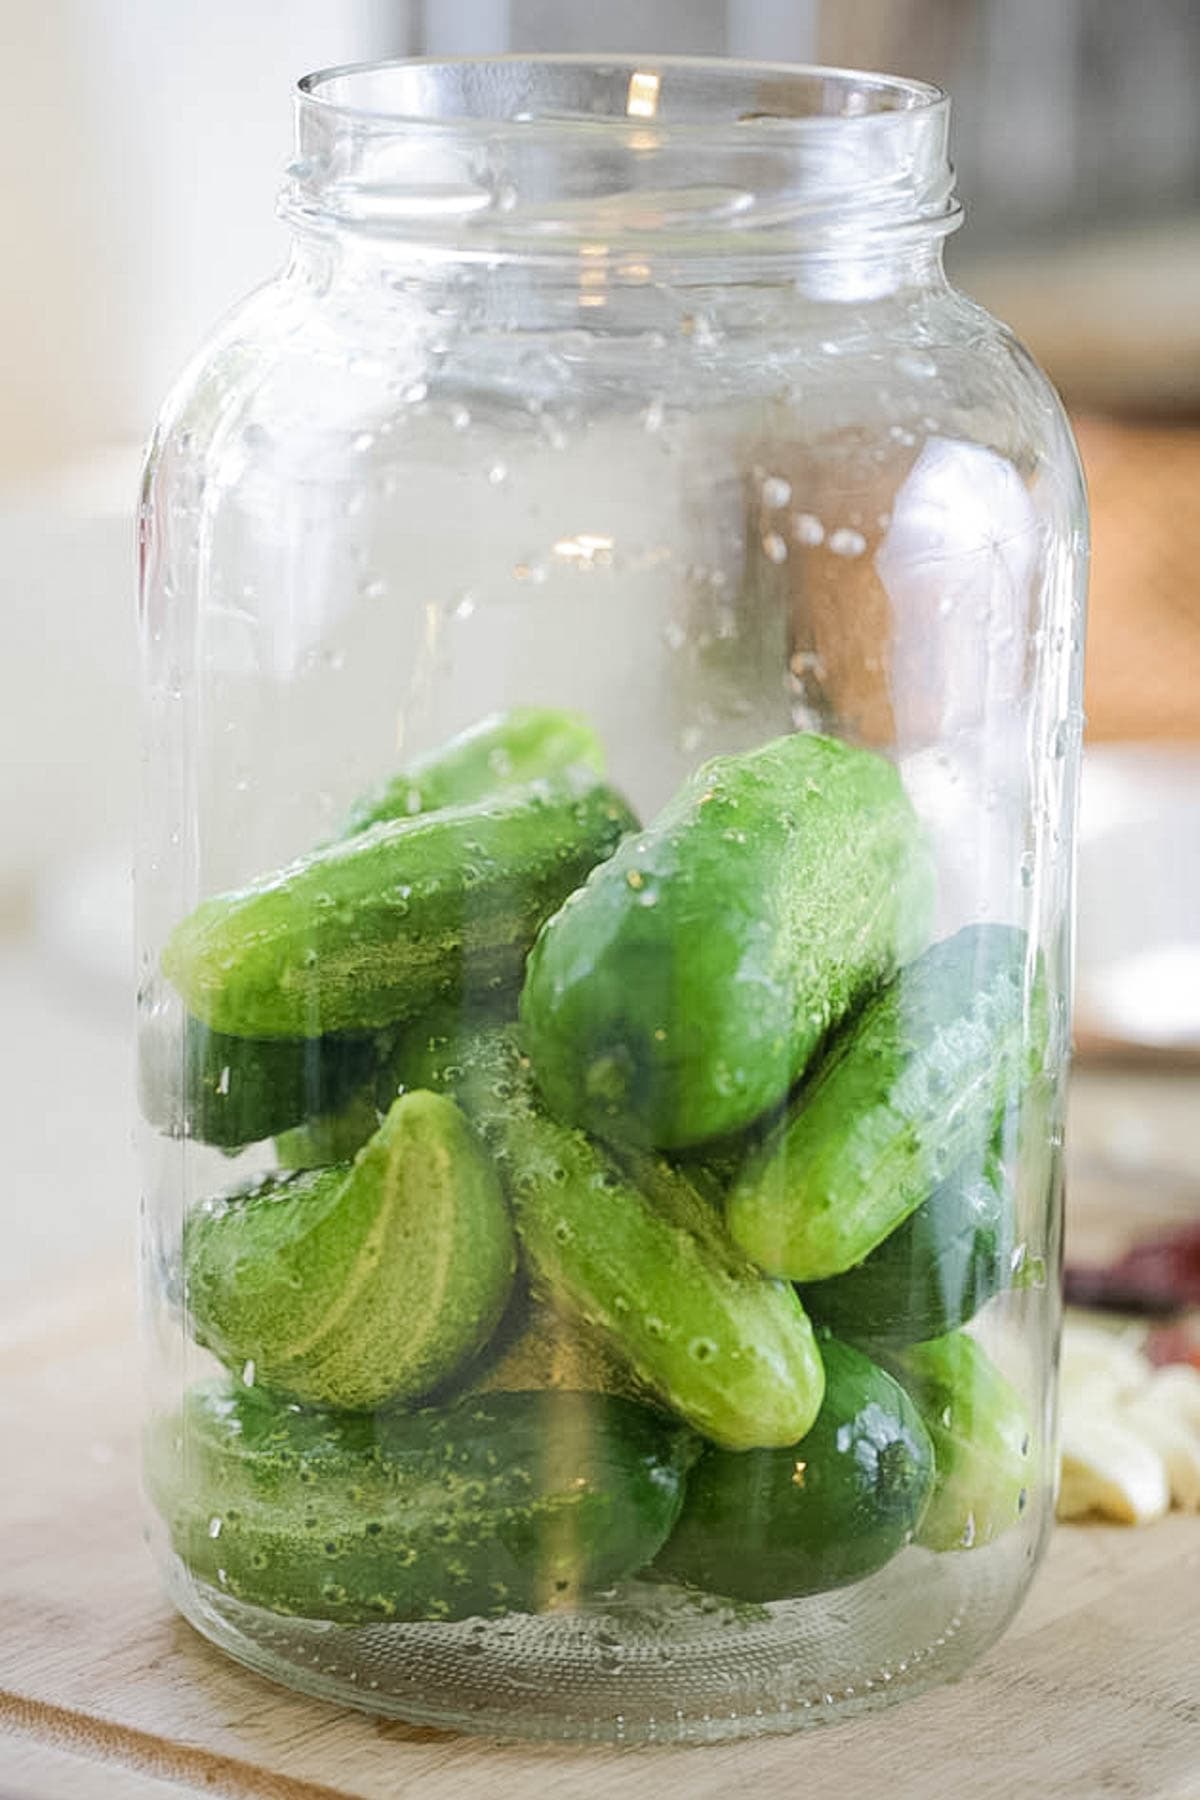 Packing the jar half way with cucumbers.